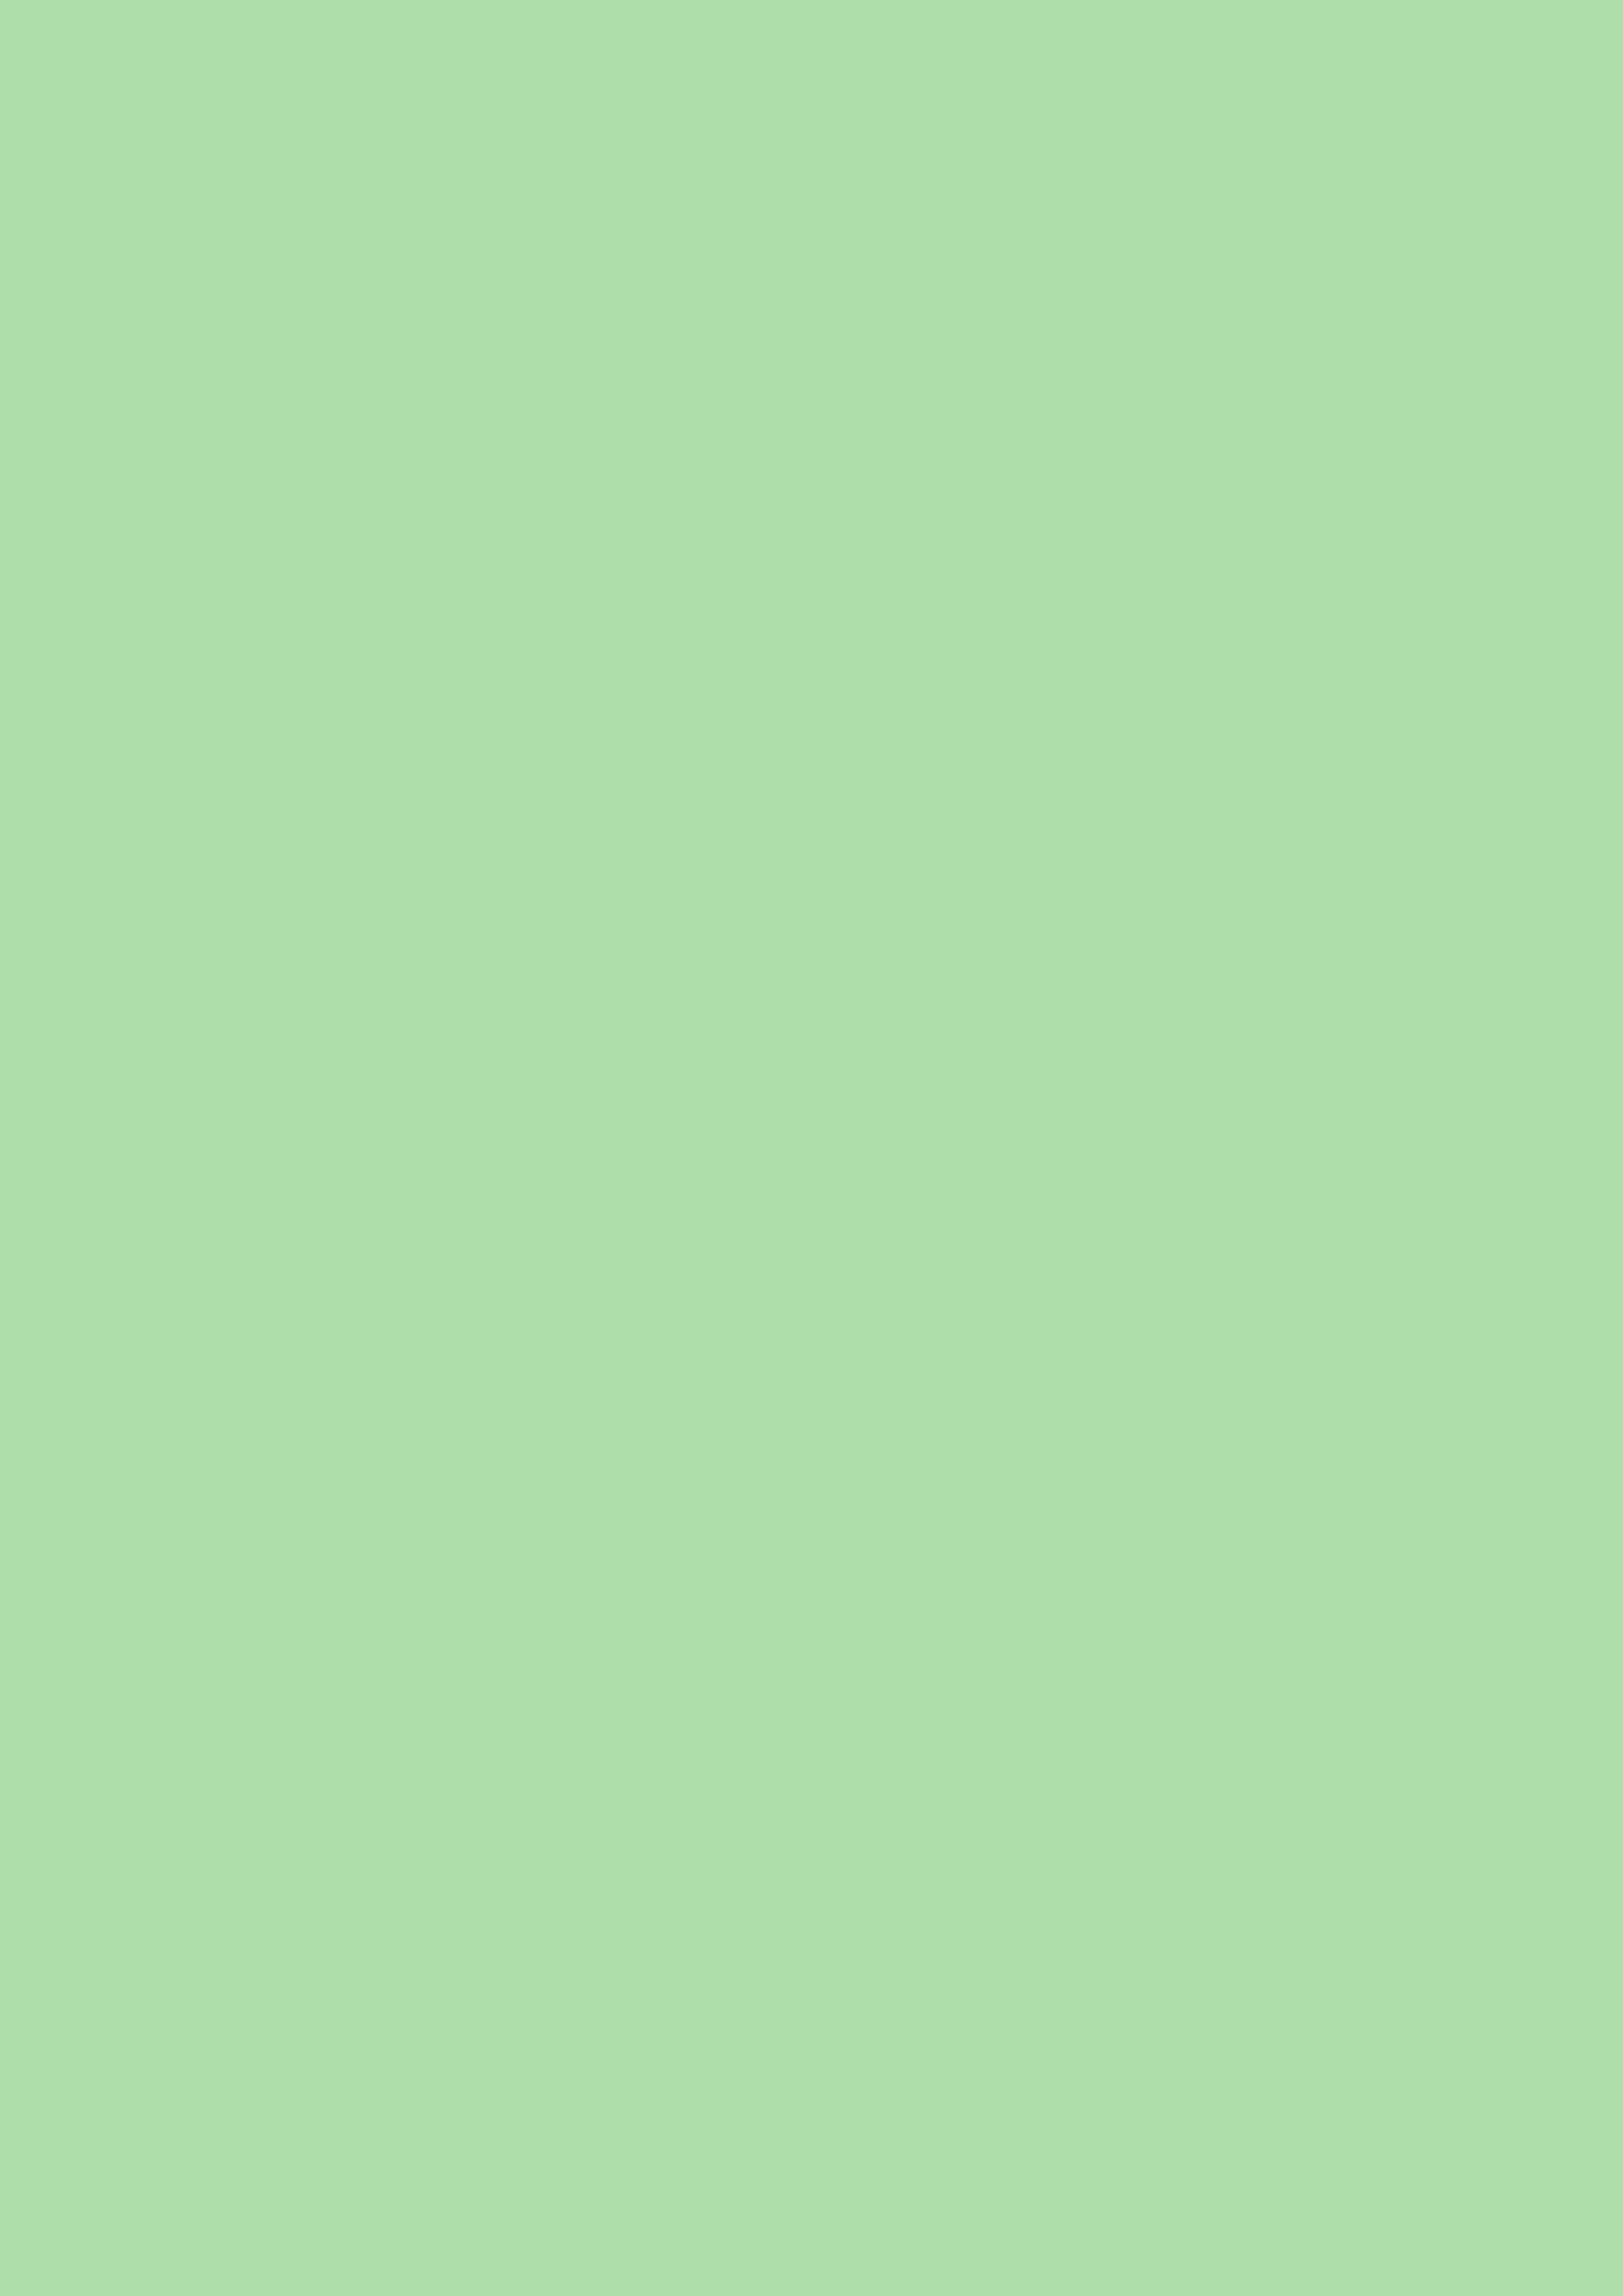 2480x3508 Light Moss Green Solid Color Background